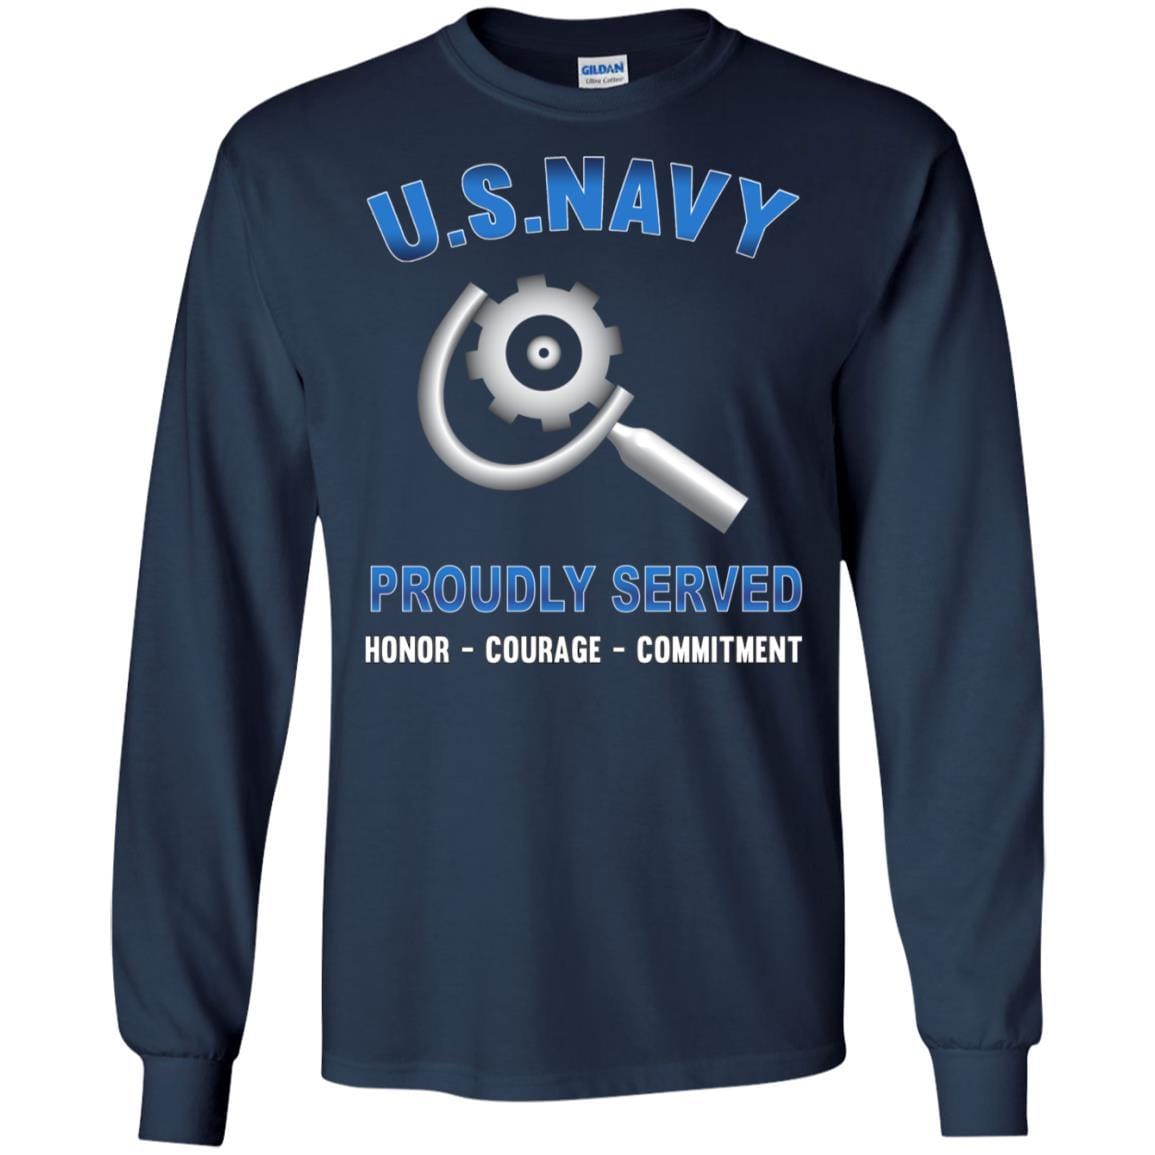 U.S Navy Machinery repairman Navy MR - Proudly Served T-Shirt For Men On Front-TShirt-Navy-Veterans Nation